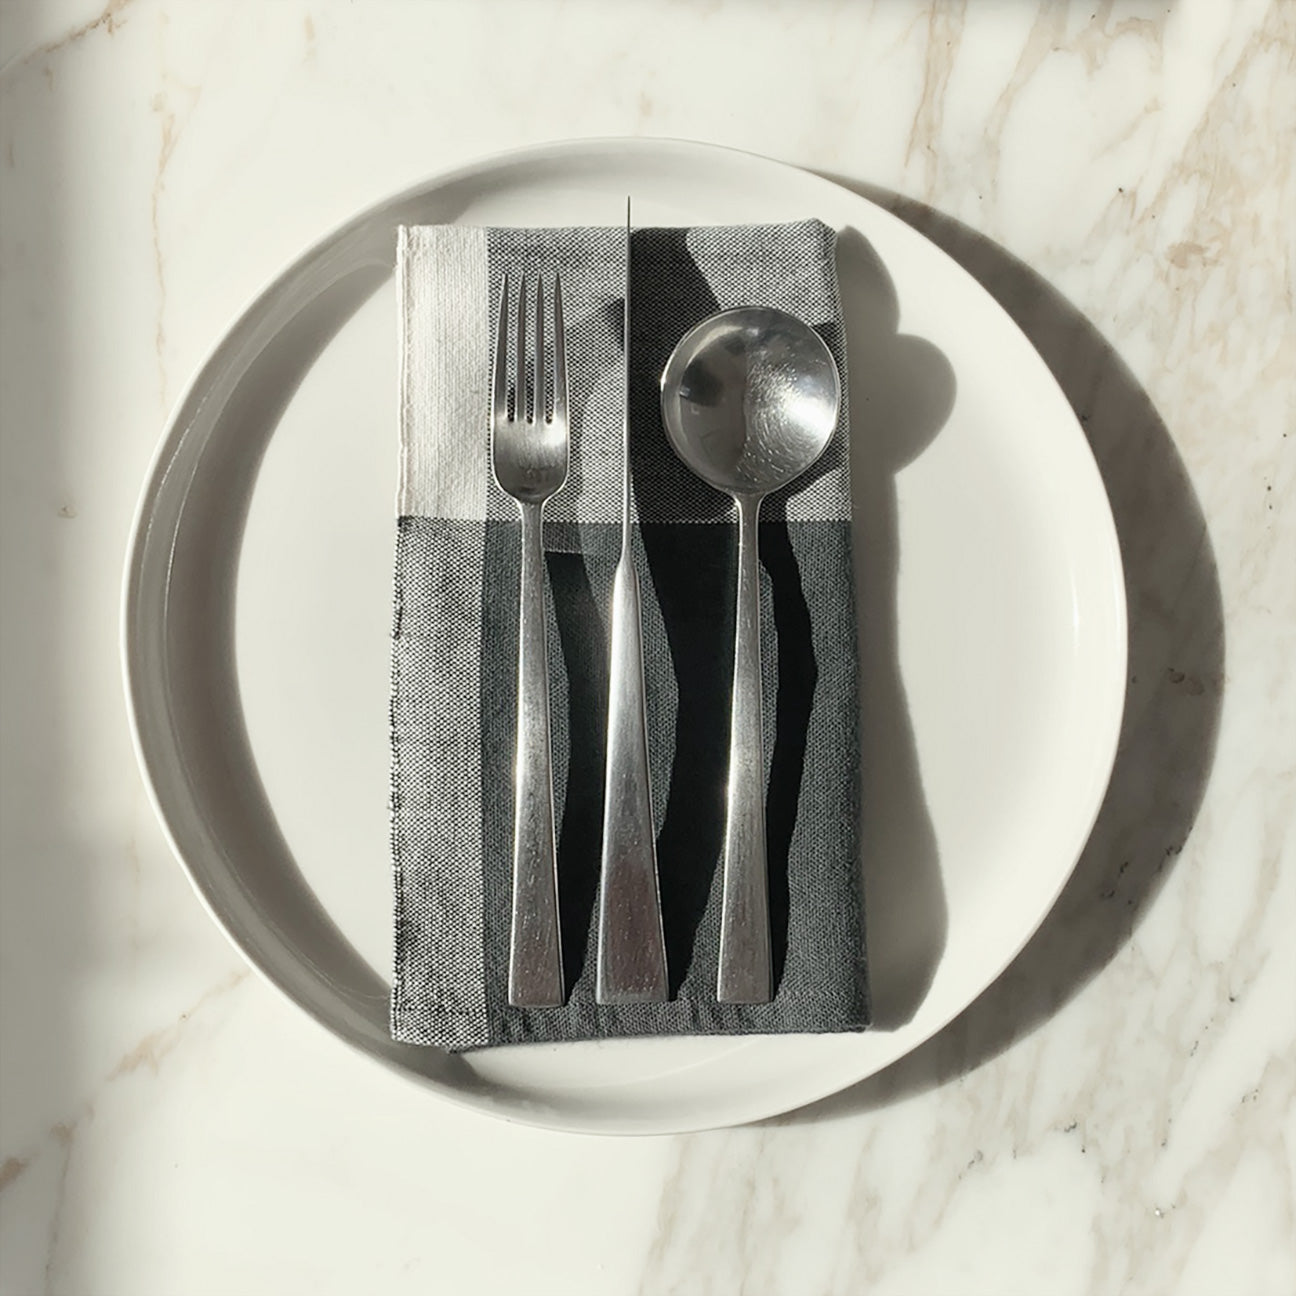 Image of M+A NYC Colorblock Napkin in Charcoal/Kora folded on a cream plate with a set of flatware placed on top.